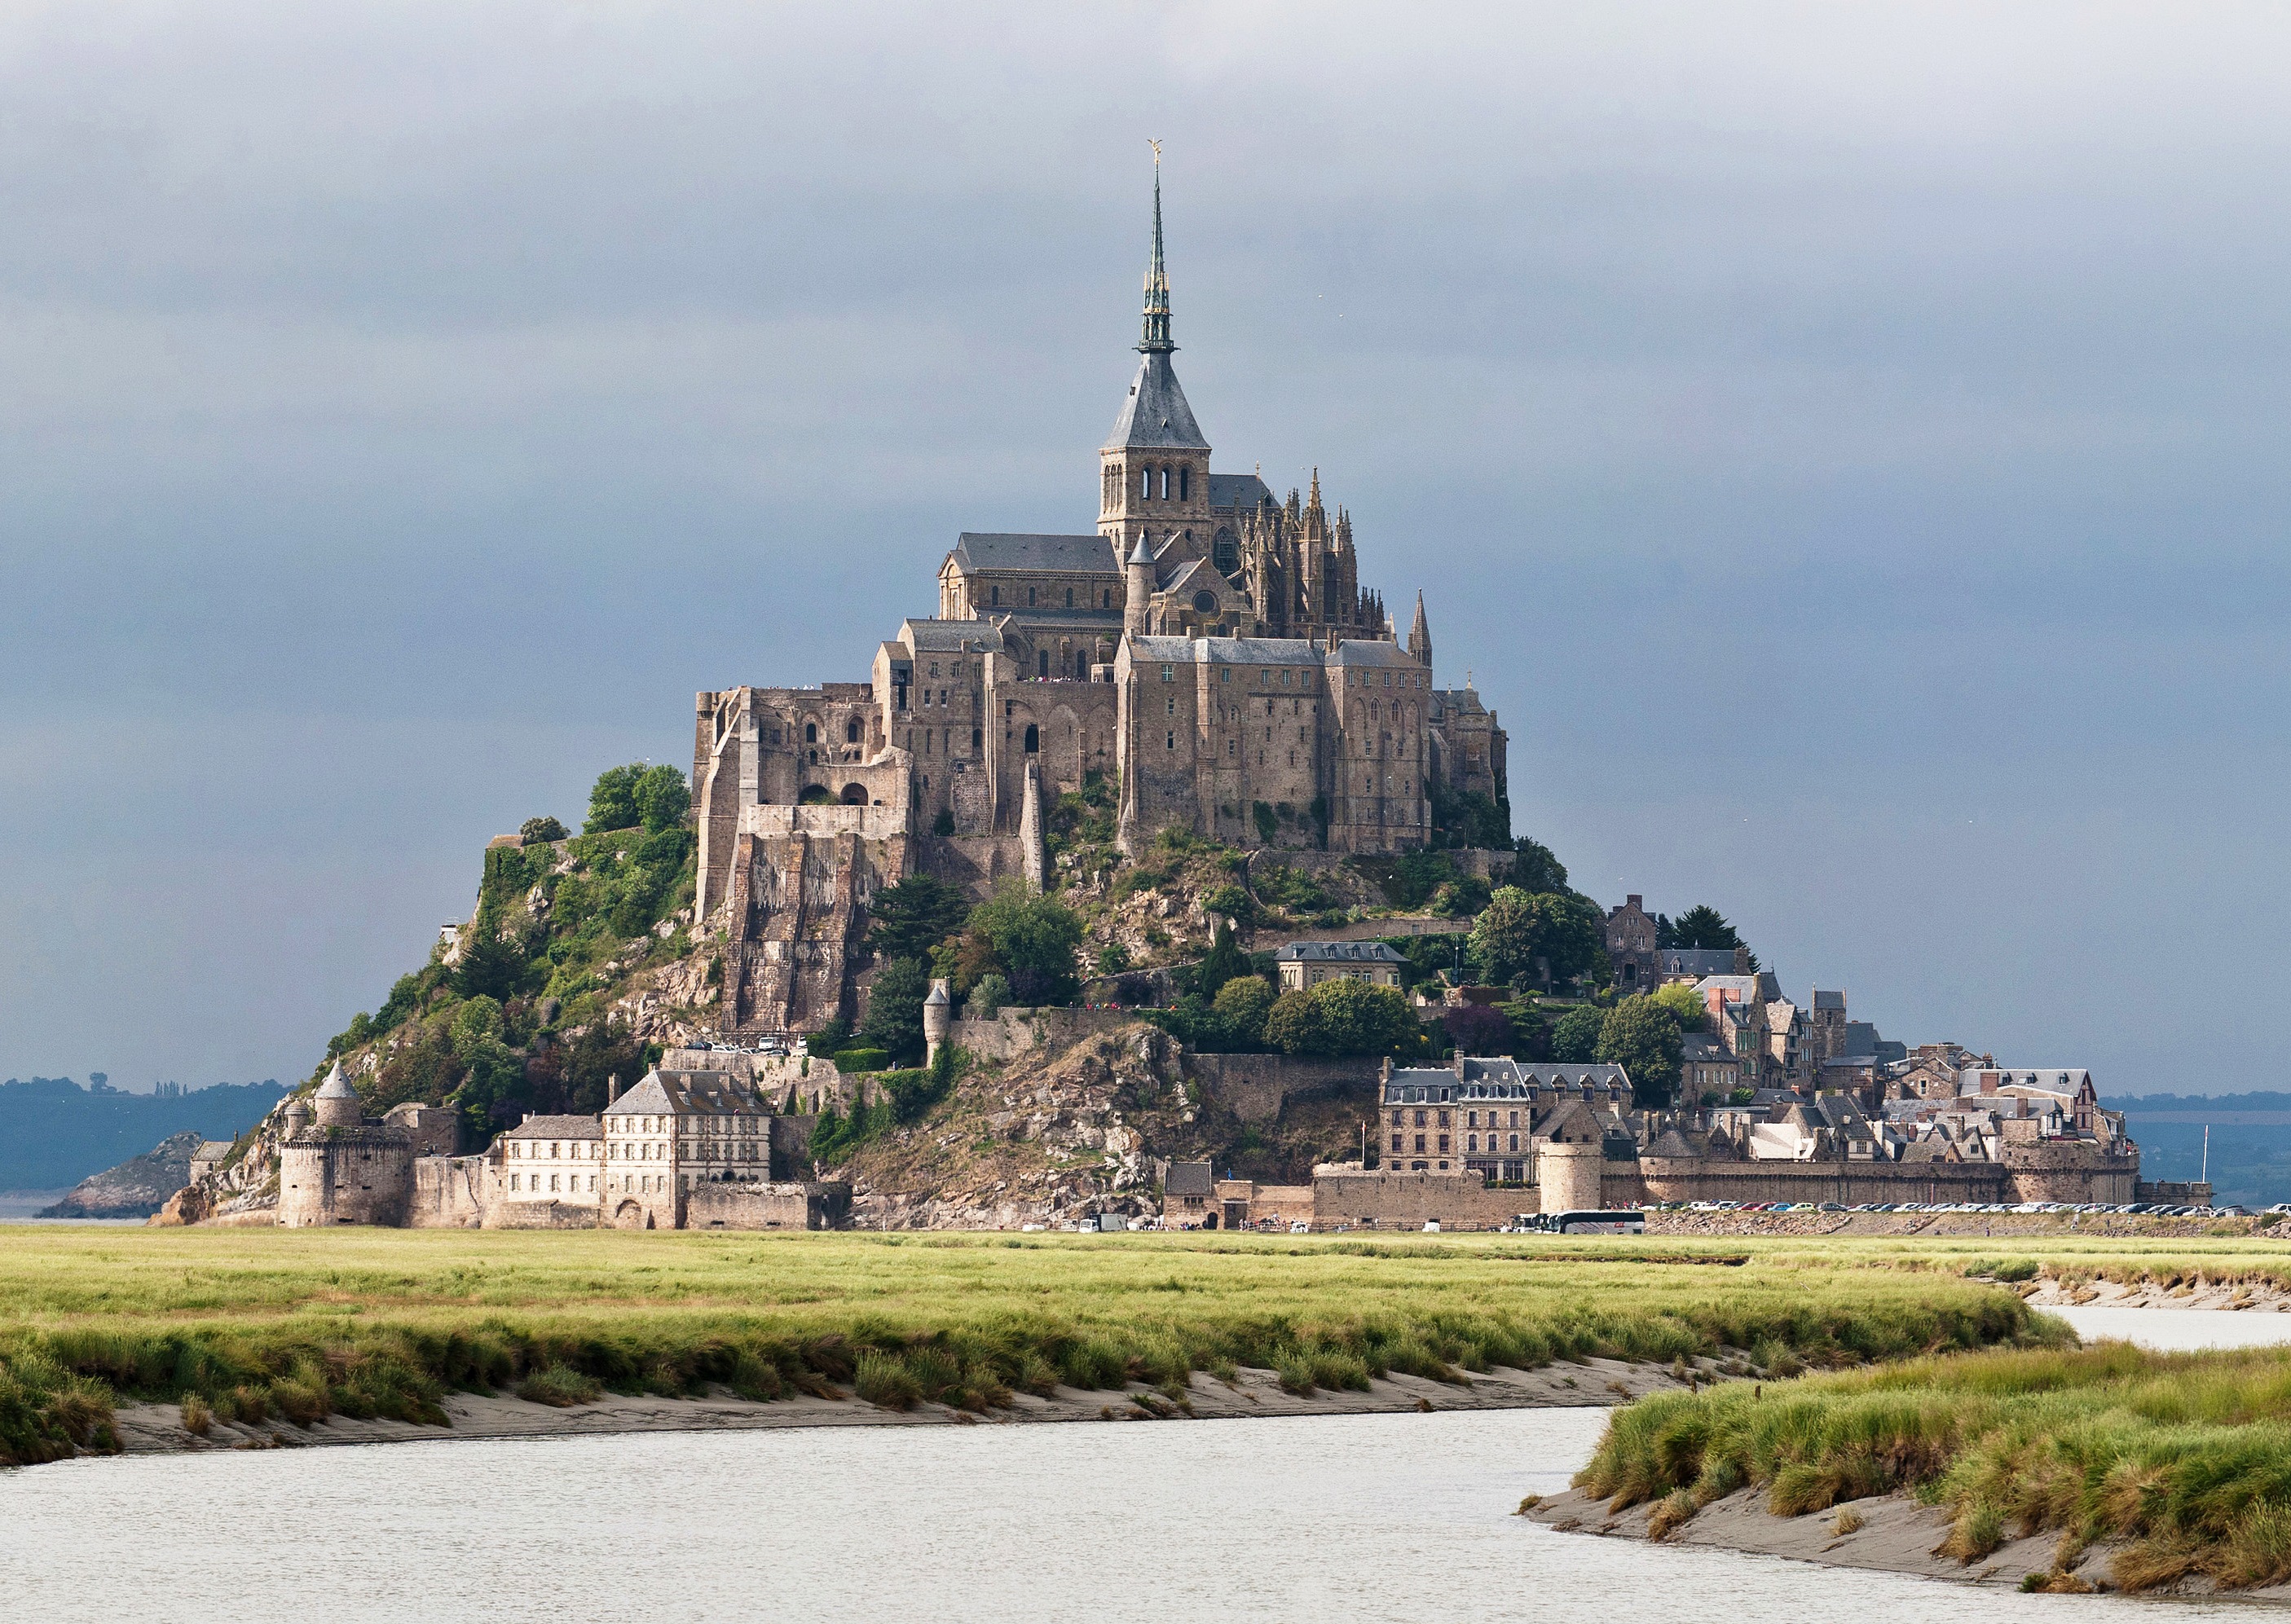 Mont_St_Michel_3,_Brittany,_France_-_July_2011